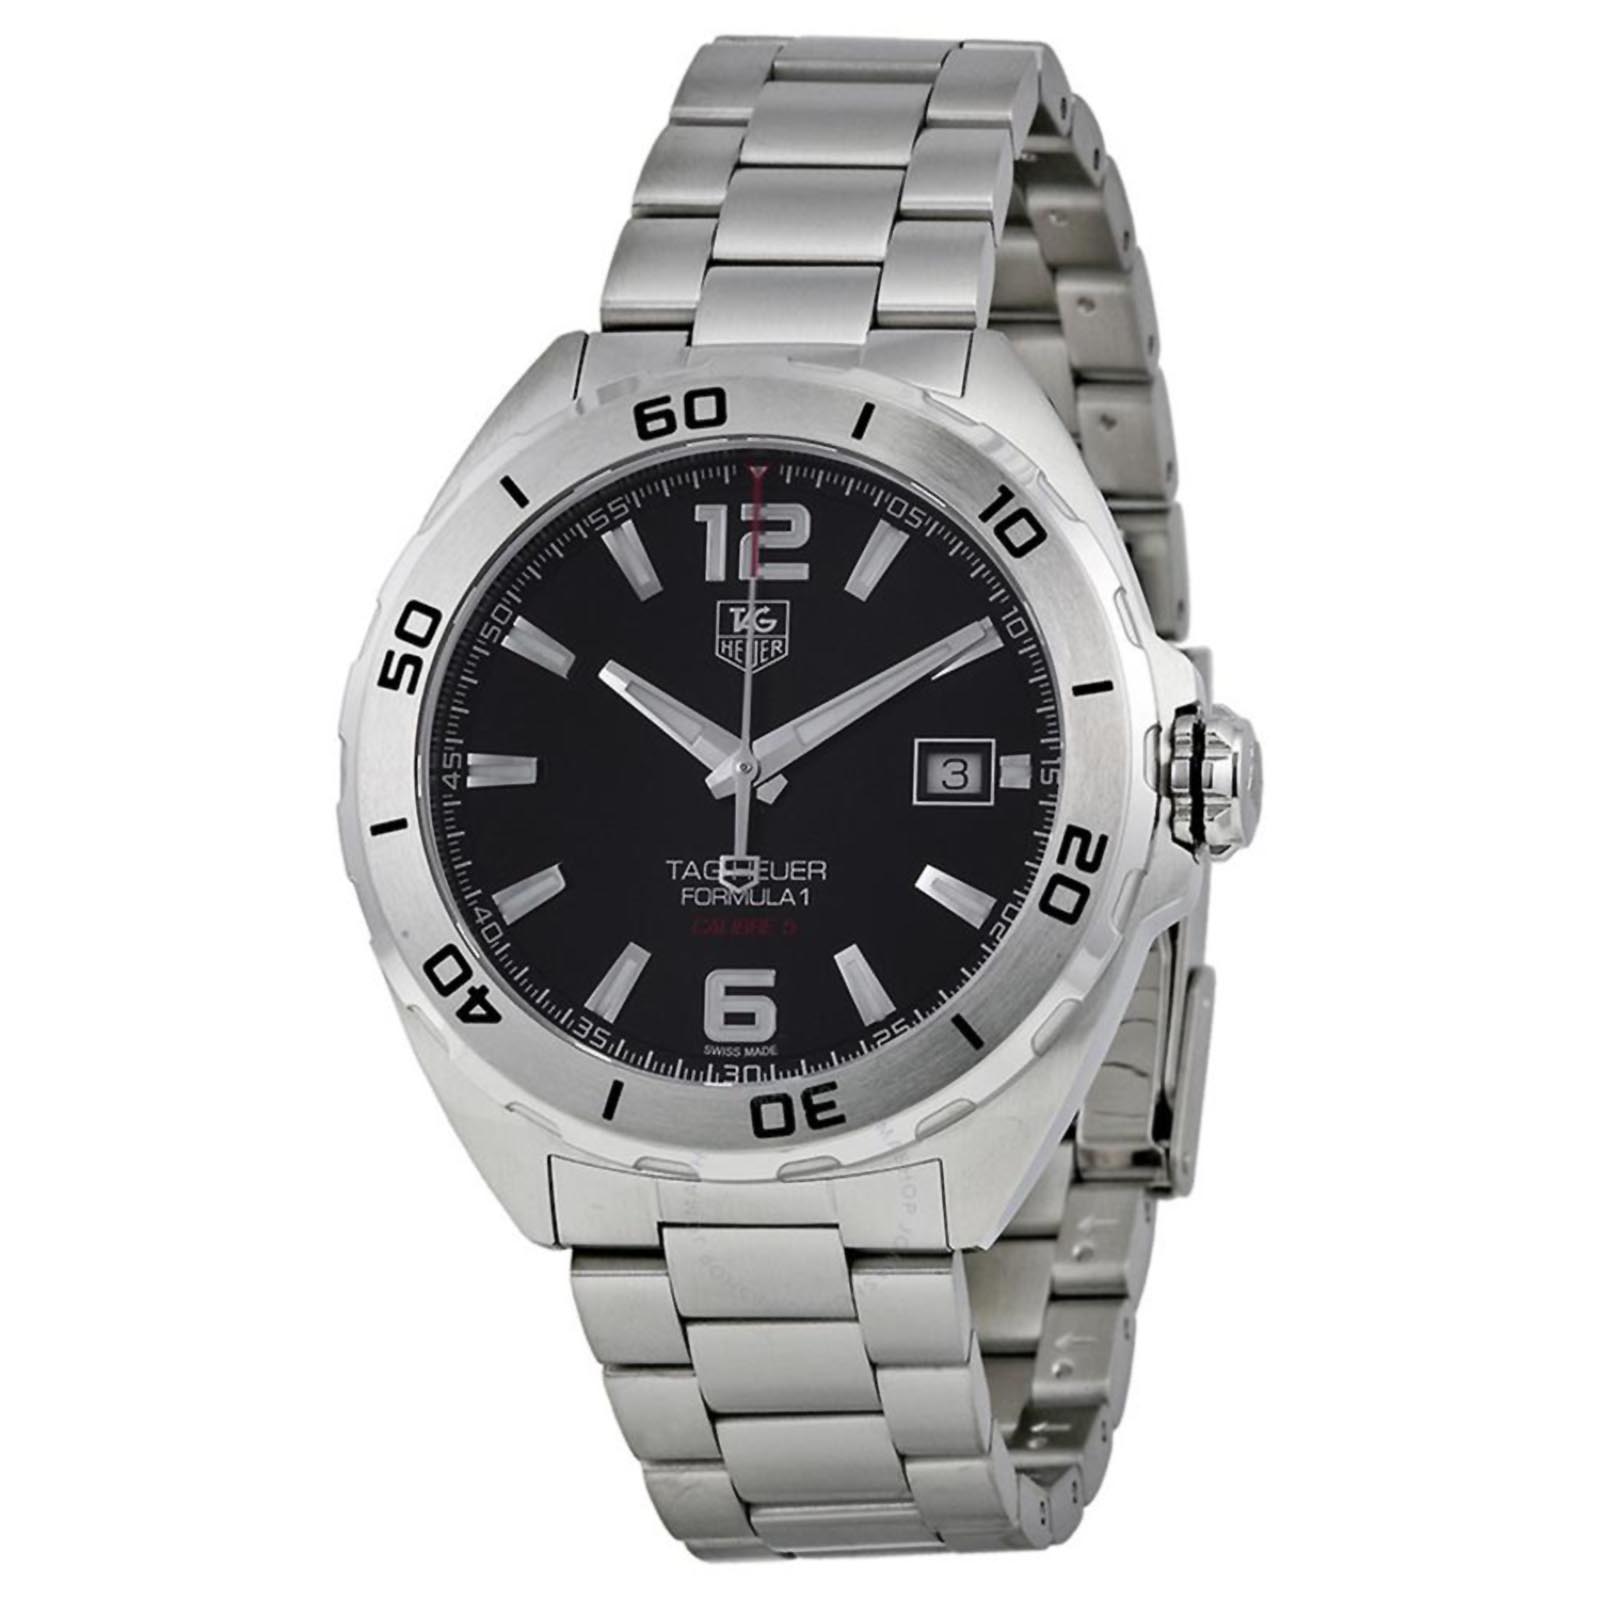 TAG Heuer Formula 1 Men's Automatic Stainless Steel Watch - Black